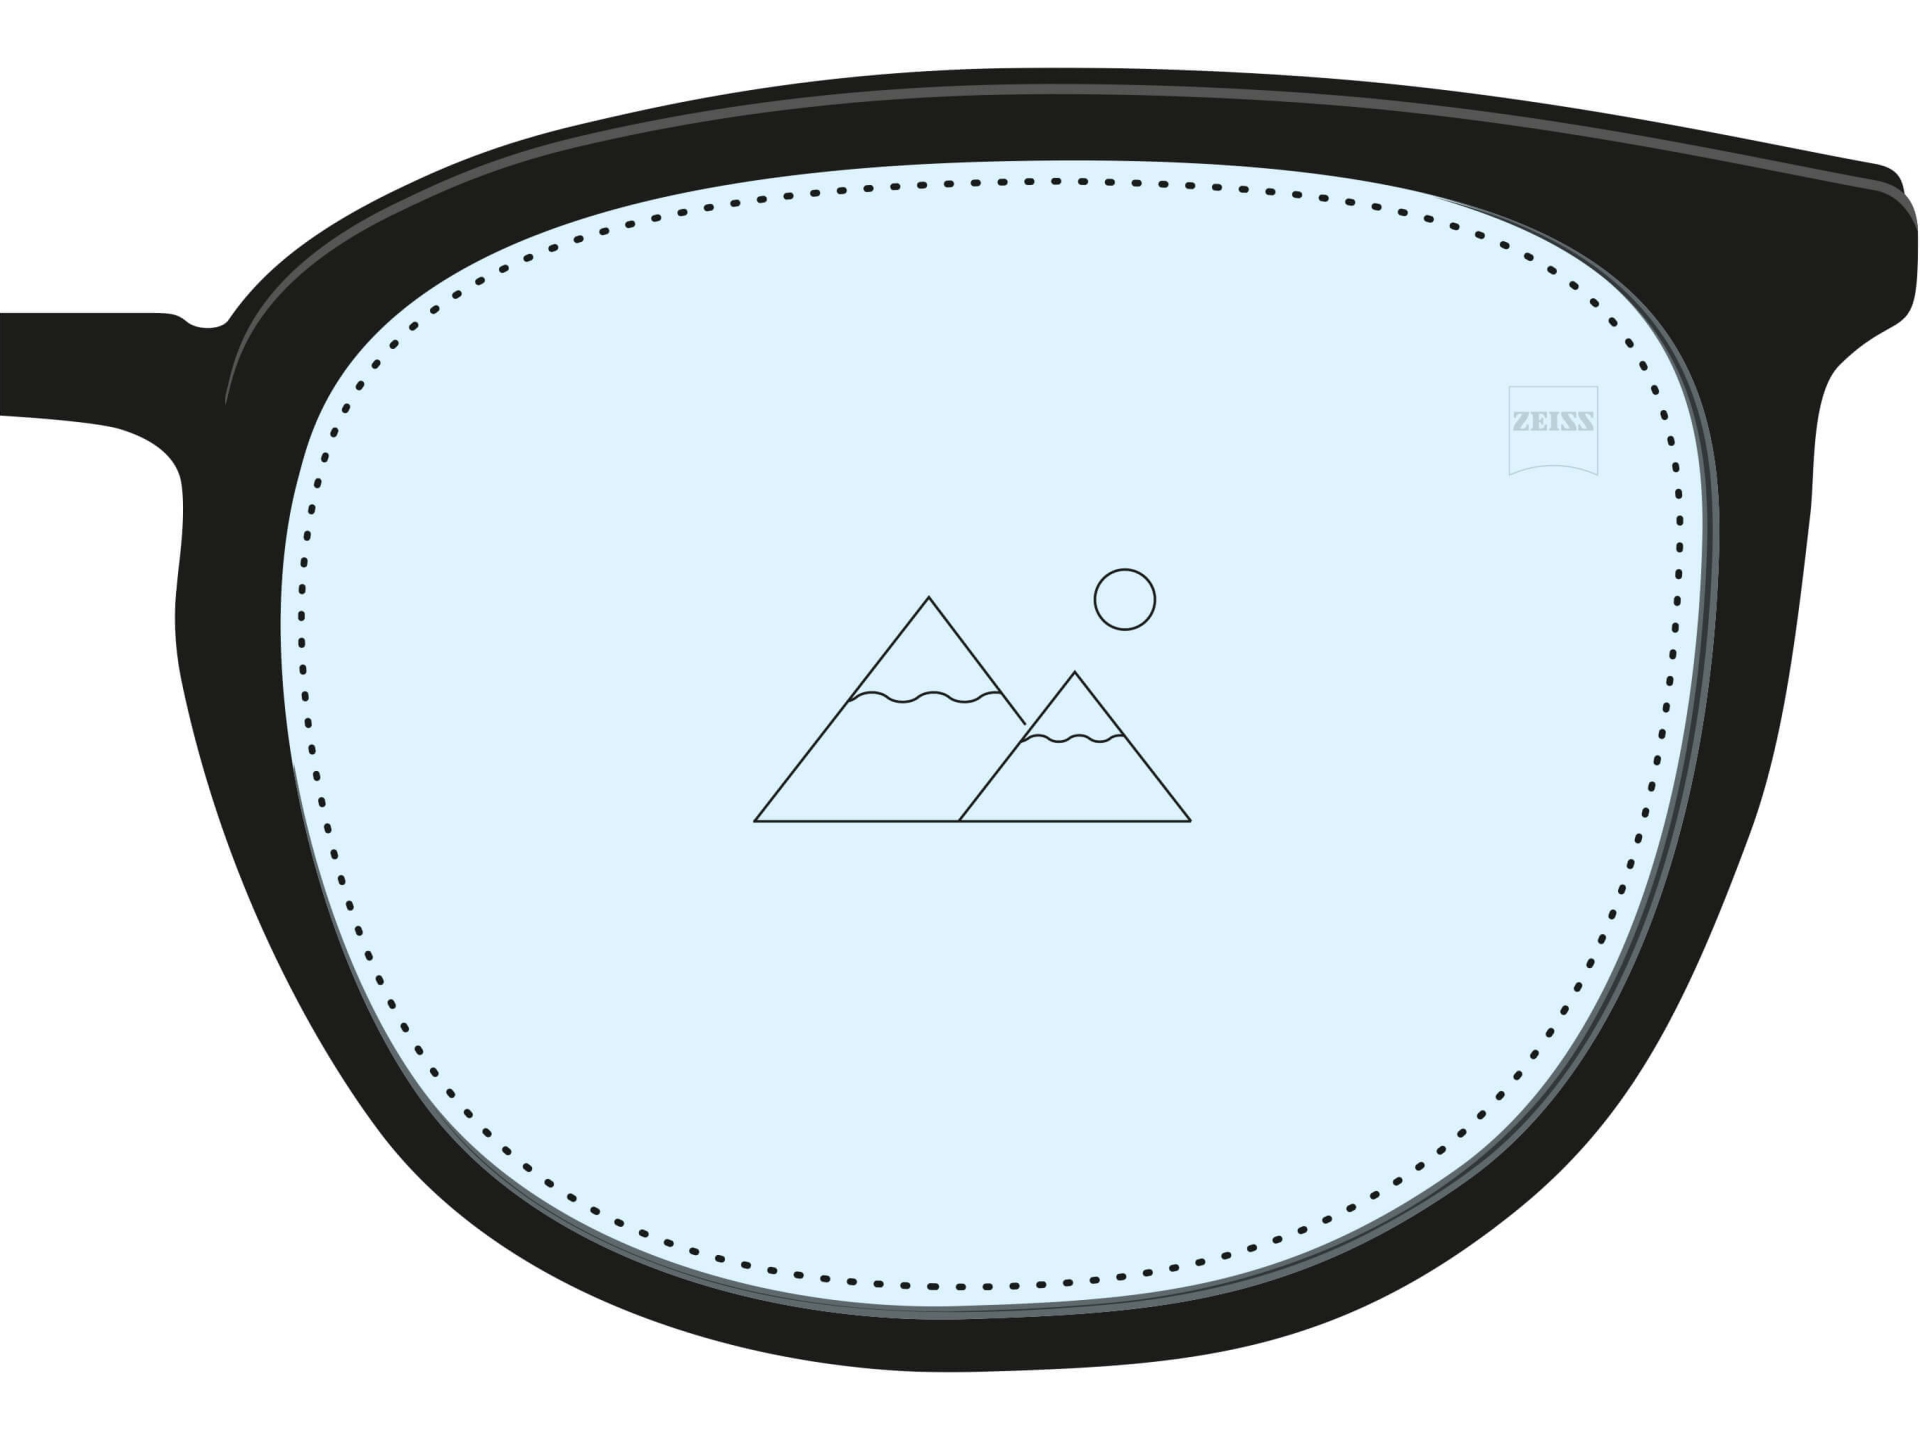 An illustration of a single vision lens. It’s filled with a light blue color throughout and a single icon shows that it has only one prescription for one distance.